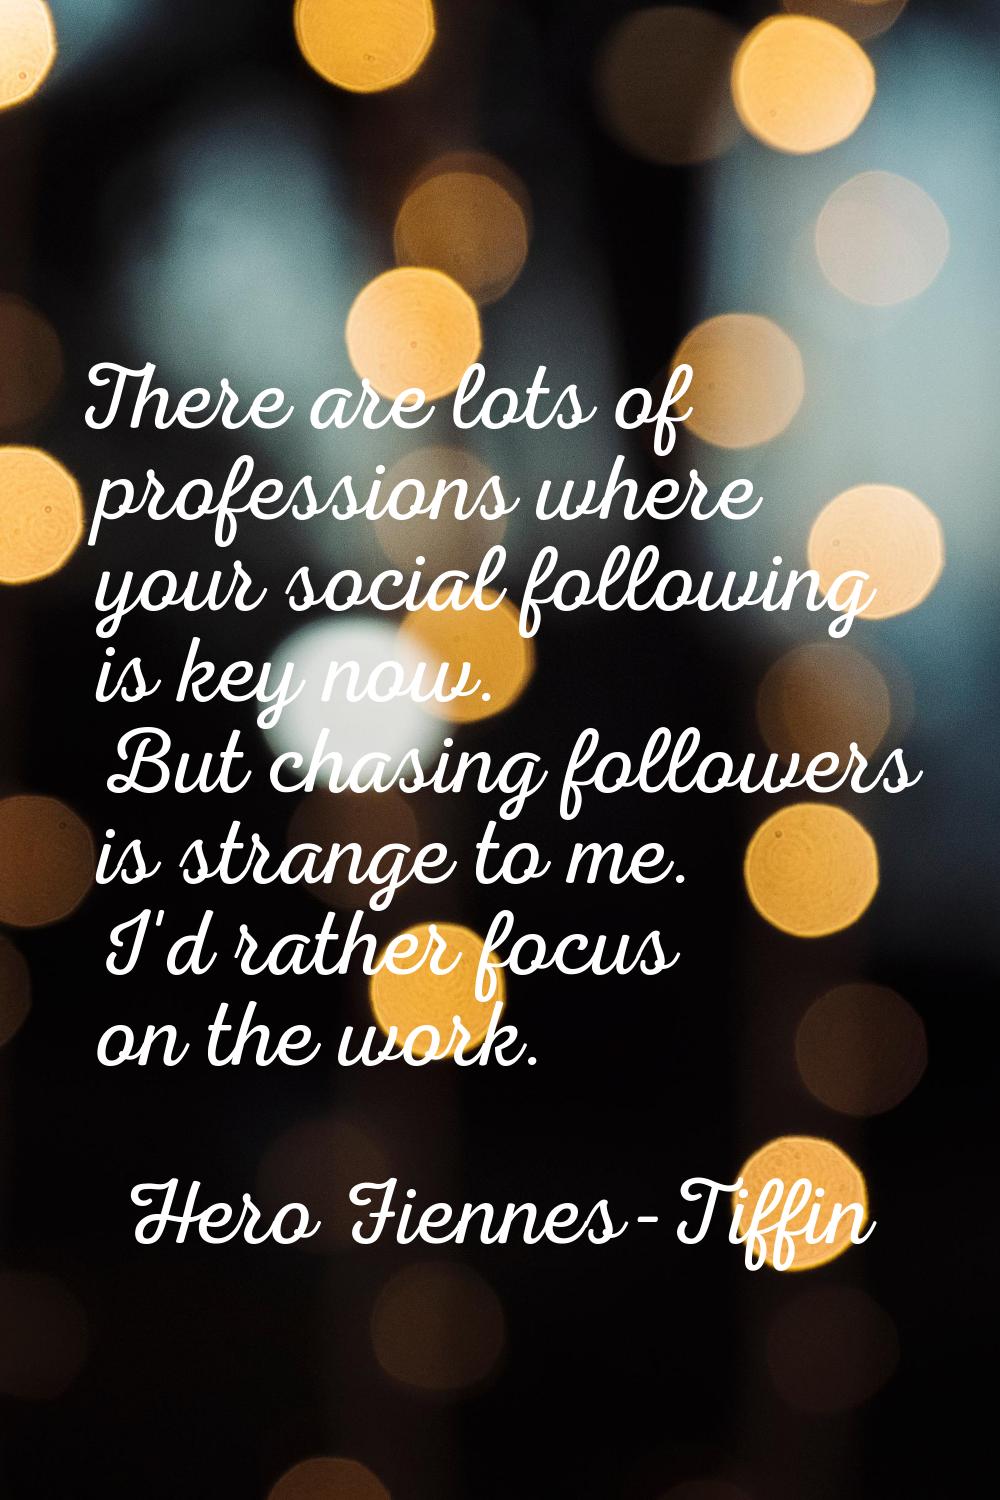 There are lots of professions where your social following is key now. But chasing followers is stra